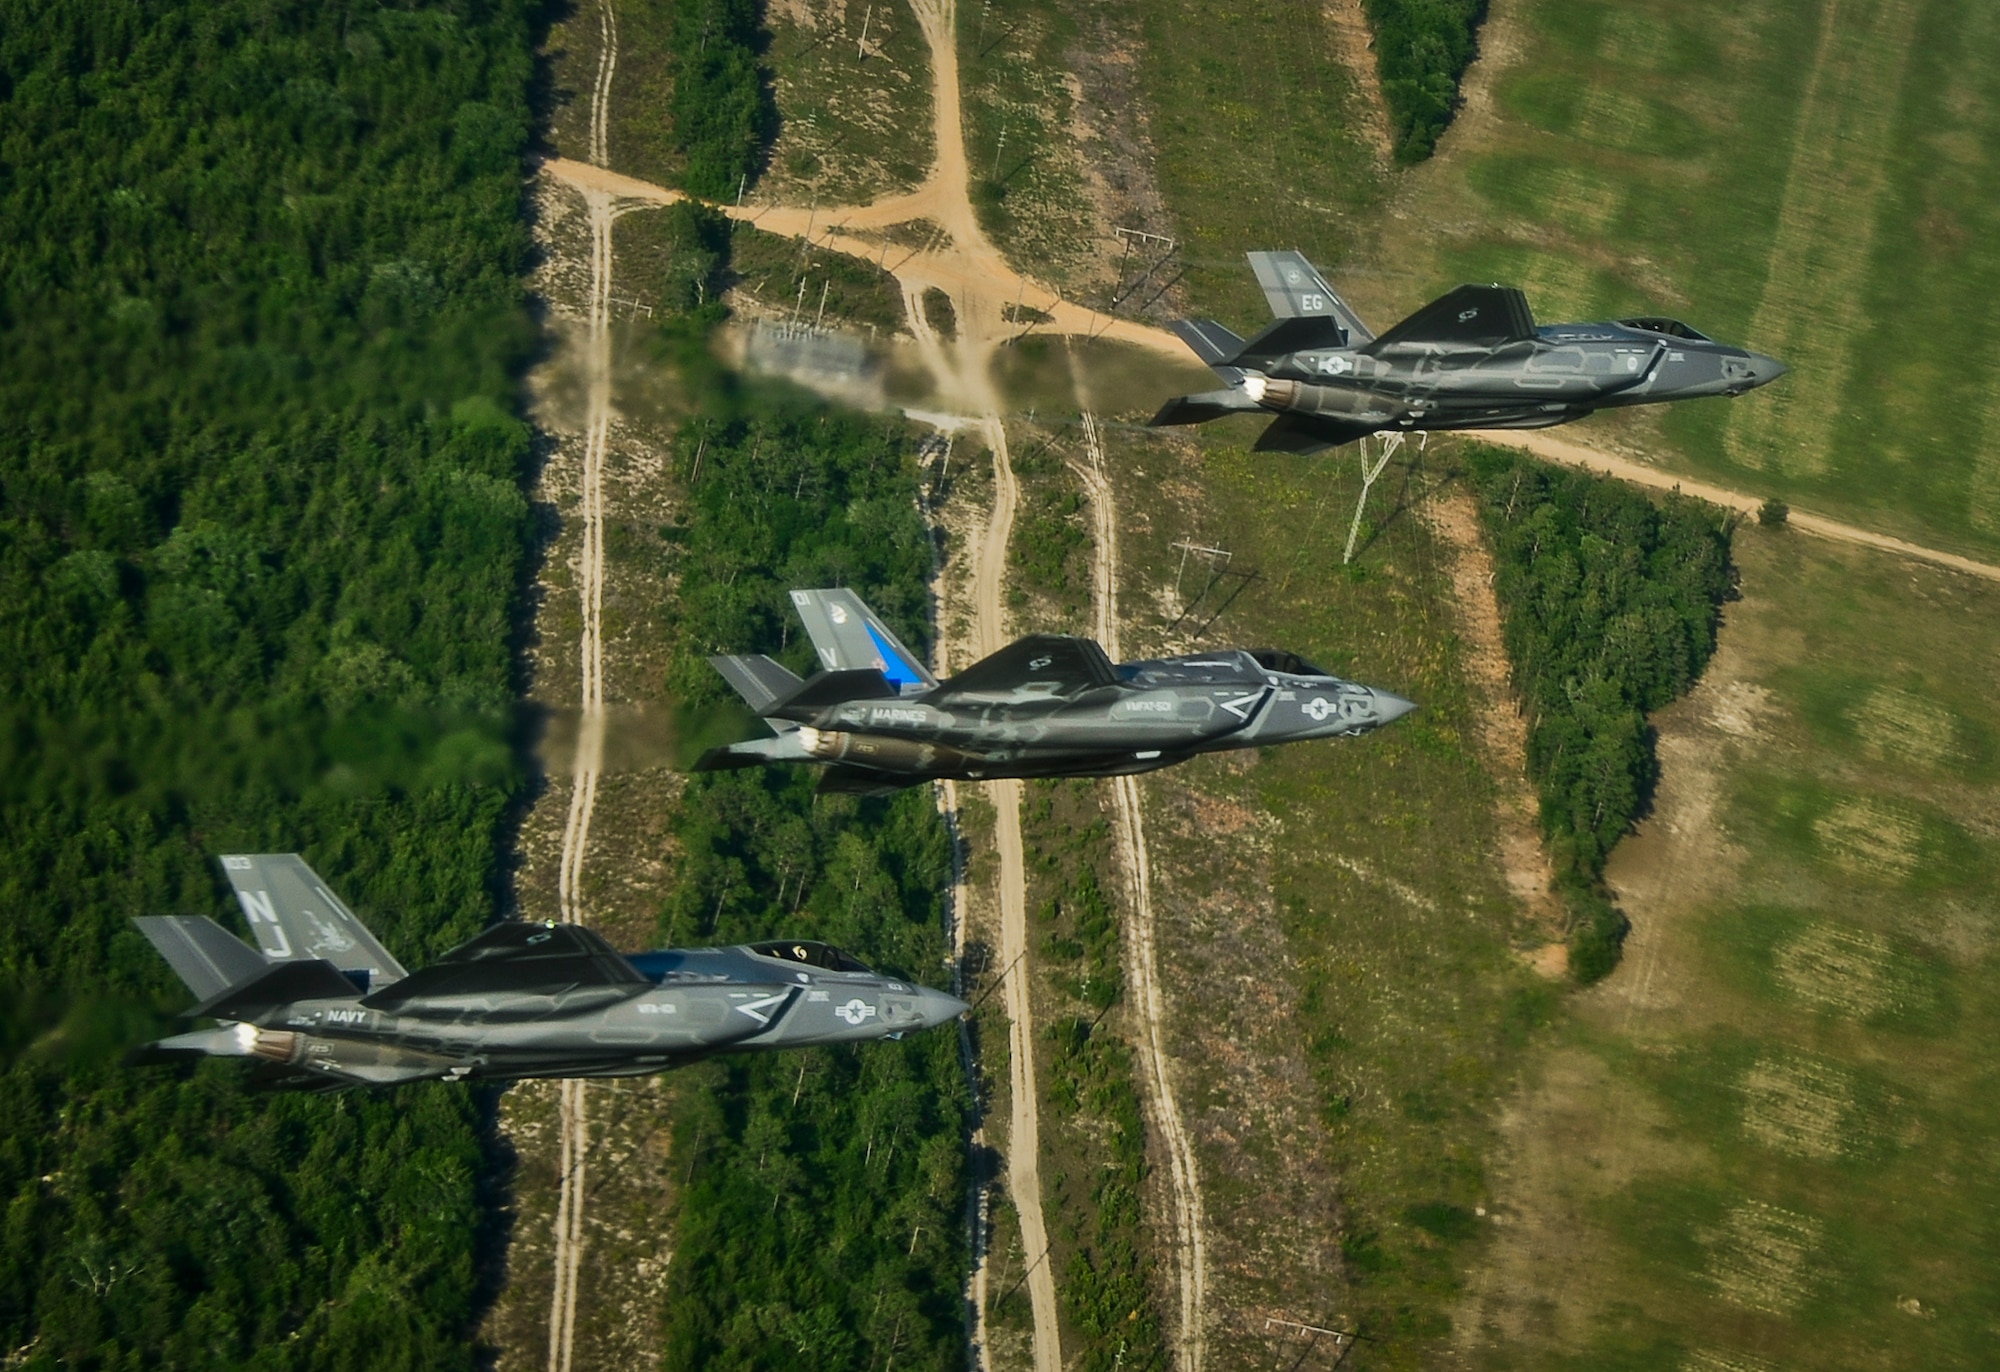 A Navy F-35C, a Marine Corps F-35B, and an Air Force F-35A Lightning II participate in a training sortie together May 21, 2014, near Eglin Air Force Base, Fla. The F-35 Integrated Training Center at Eglin AFB surpassed 5,000 combined training sorties May 28, 2014, contributing more than a third of all sorties in the Department of Defense’s F-35 program. All three variants of the fifth generation multirole stealth fighter are hosted by the 33rd Fighter Wing here. The F-35 is designed with the stealth, electronic warfare, and multi-spectral fused sensor capabilities, which will increase lethality and survivability in a contested environment. (U.S. Air Force photo/Staff Sgt. Joely M. Santiago)